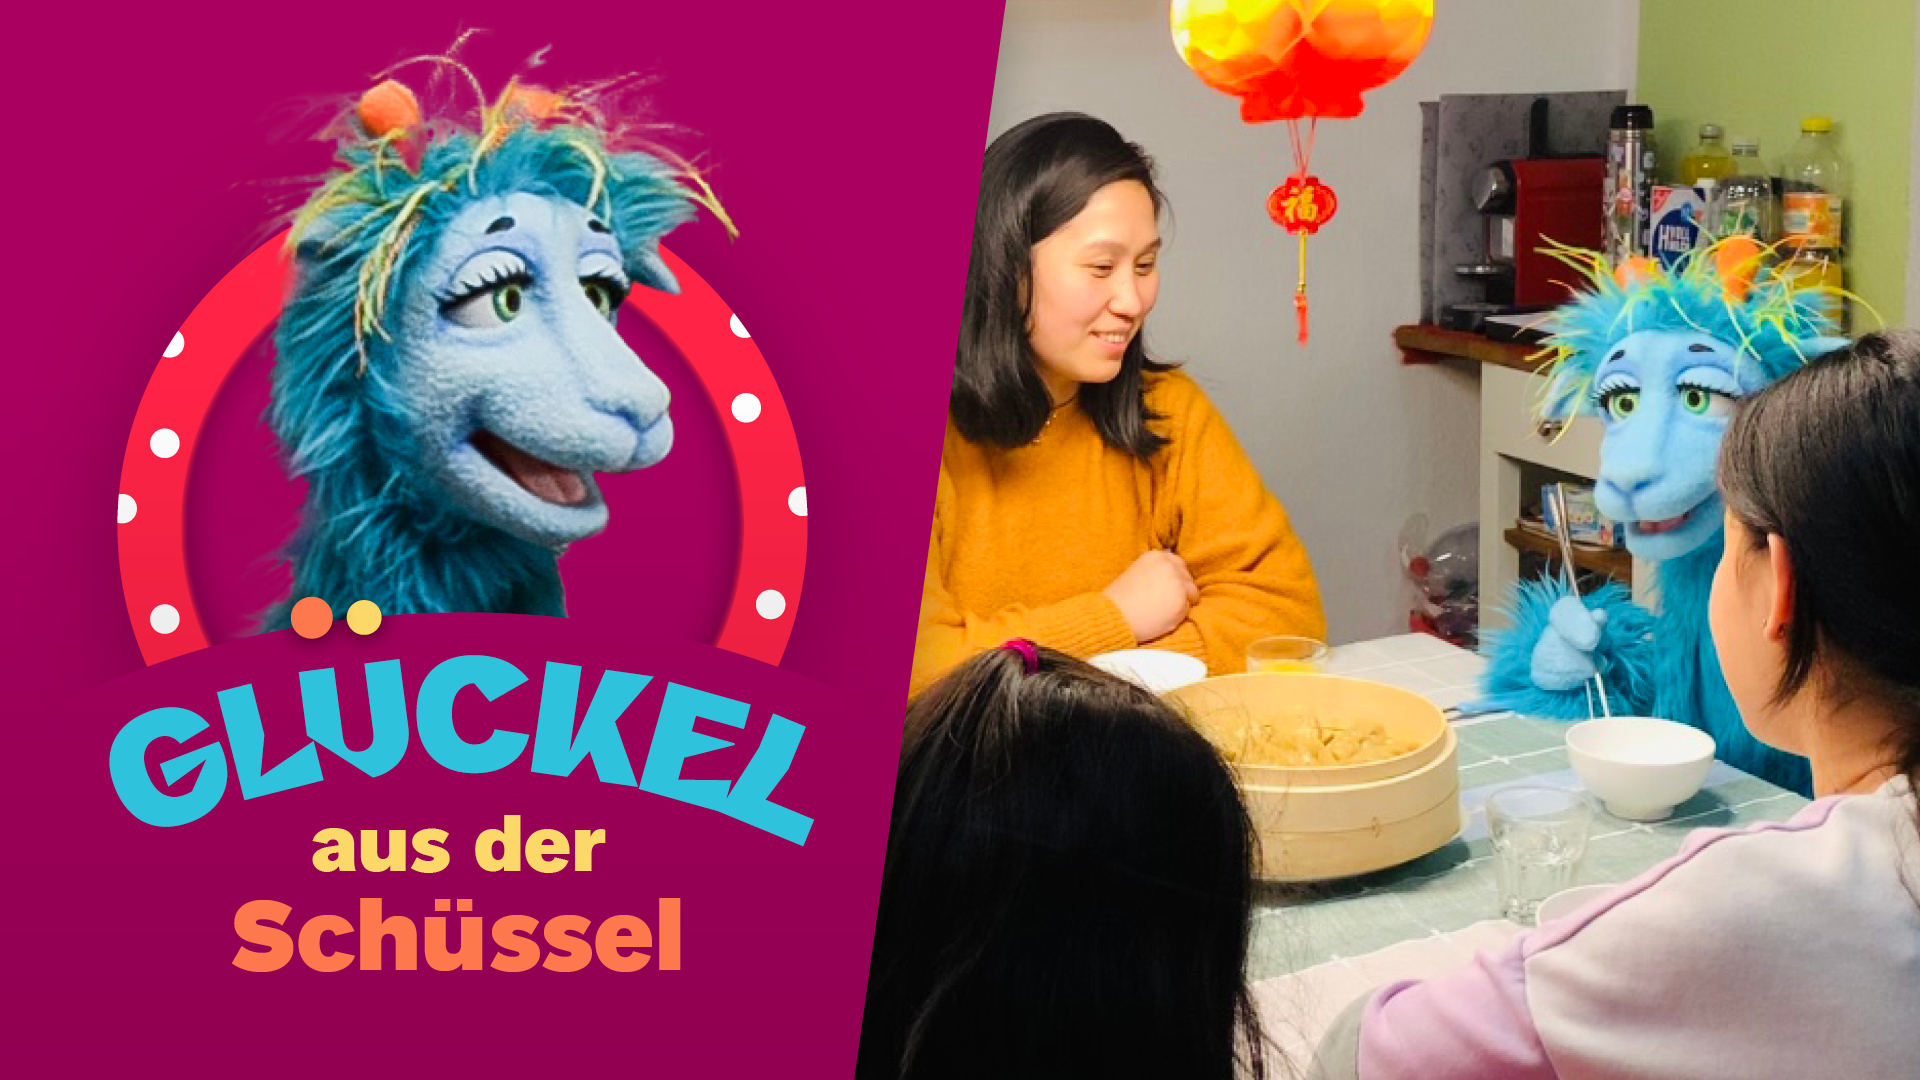 Family sits at a table with fantasy creature Glückel and eats jiaozi.